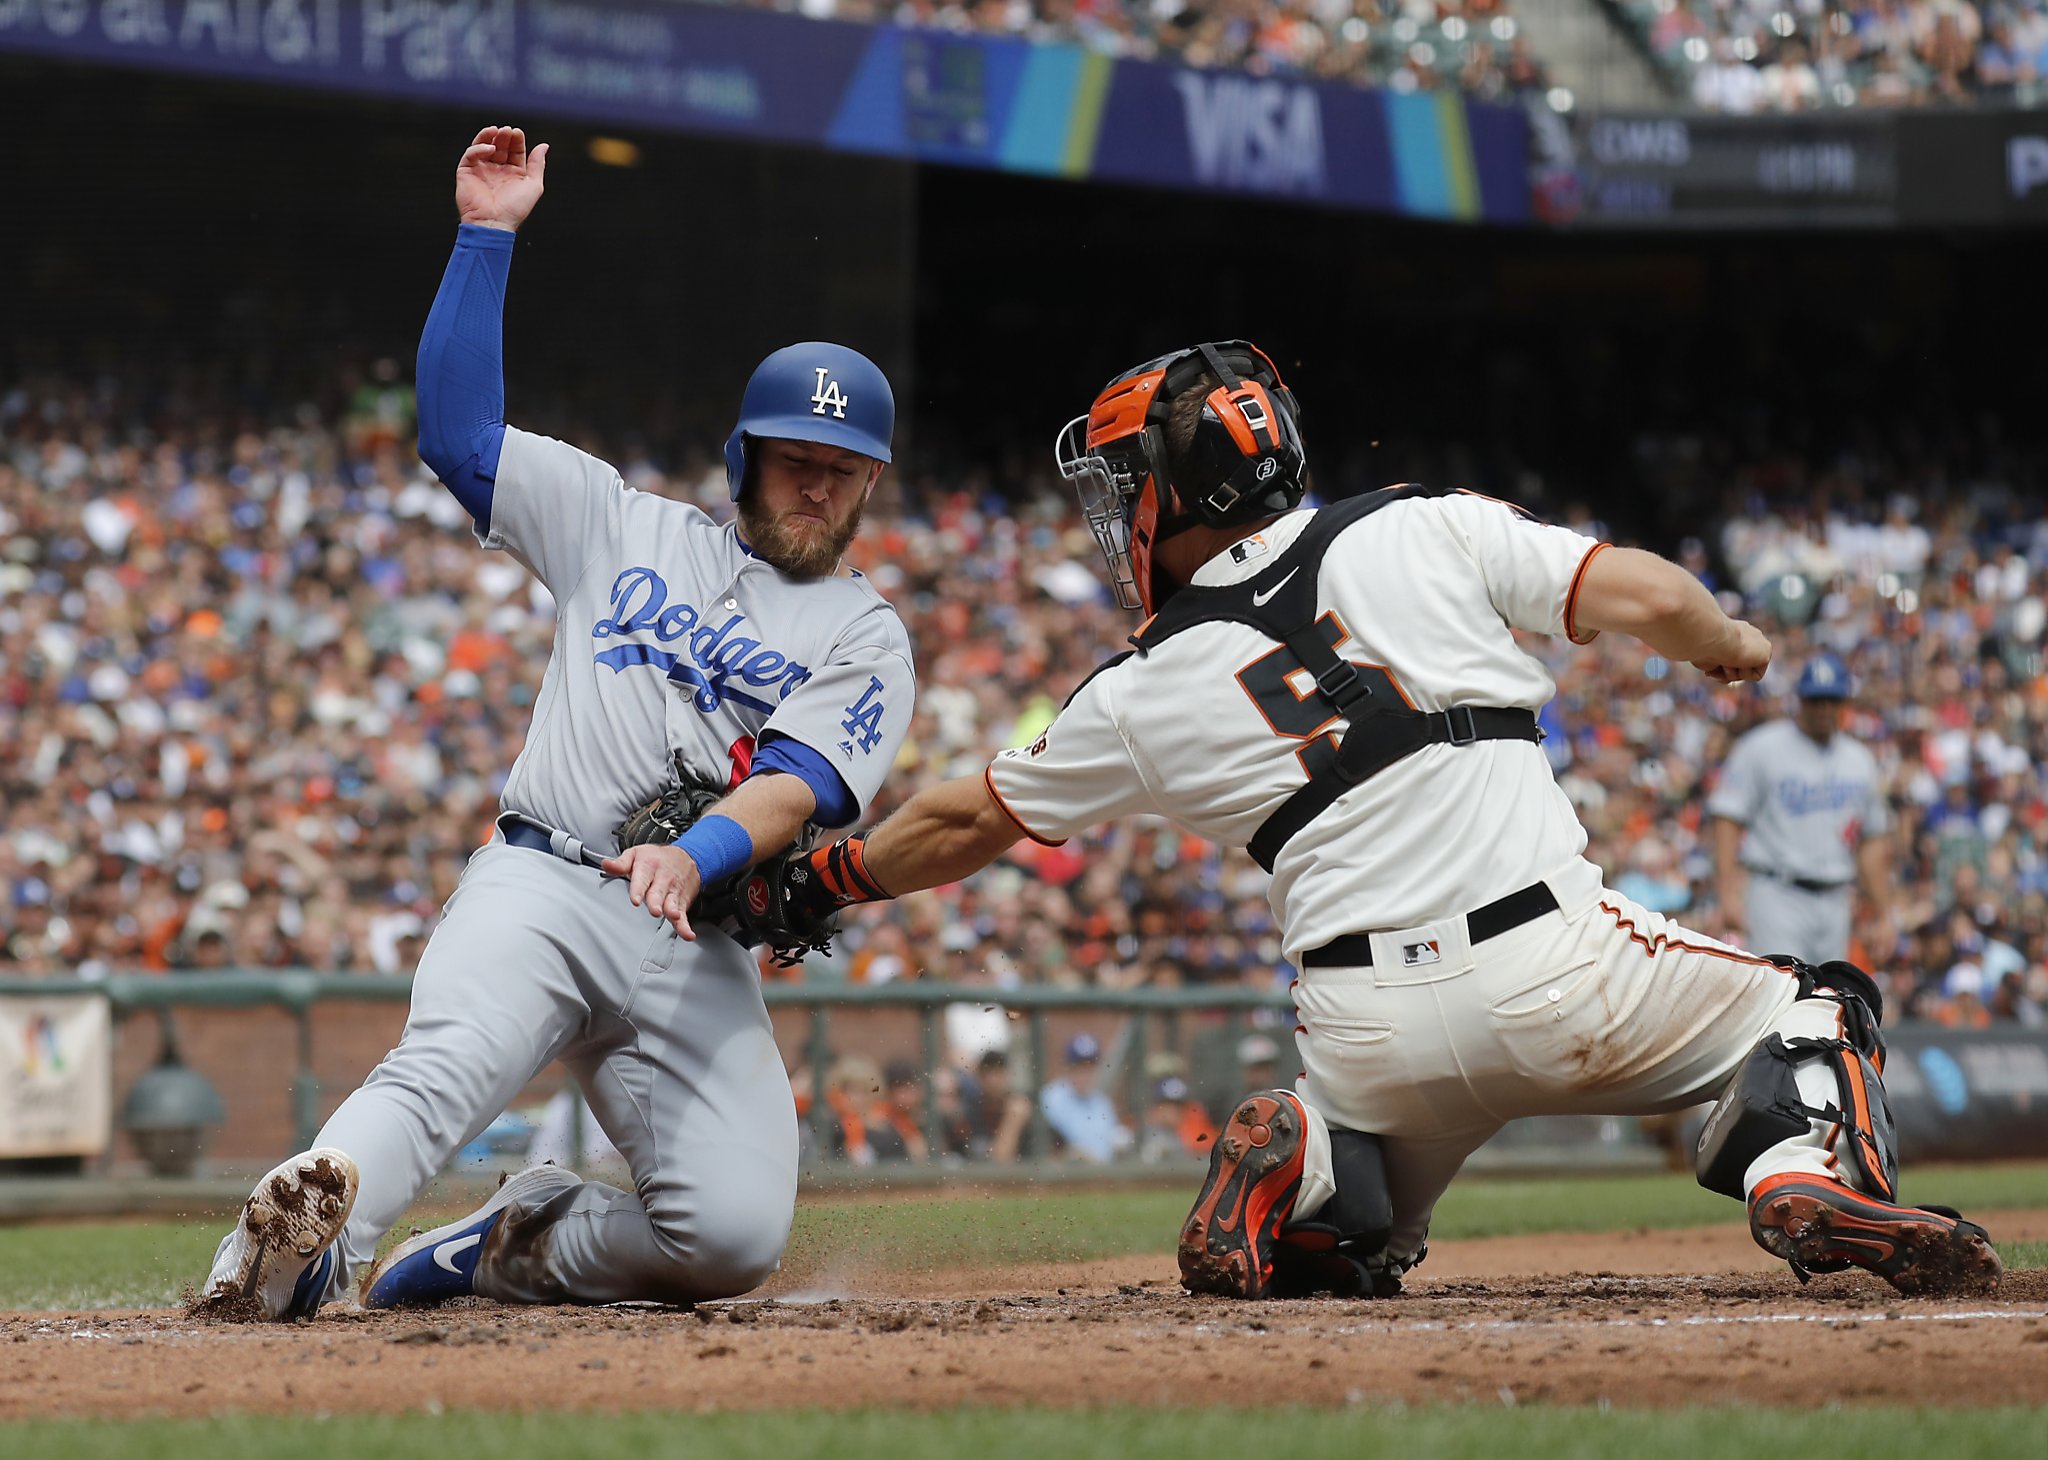 Dodgers beat Giants at AT&T Park to clinch playoff spot - SFGate